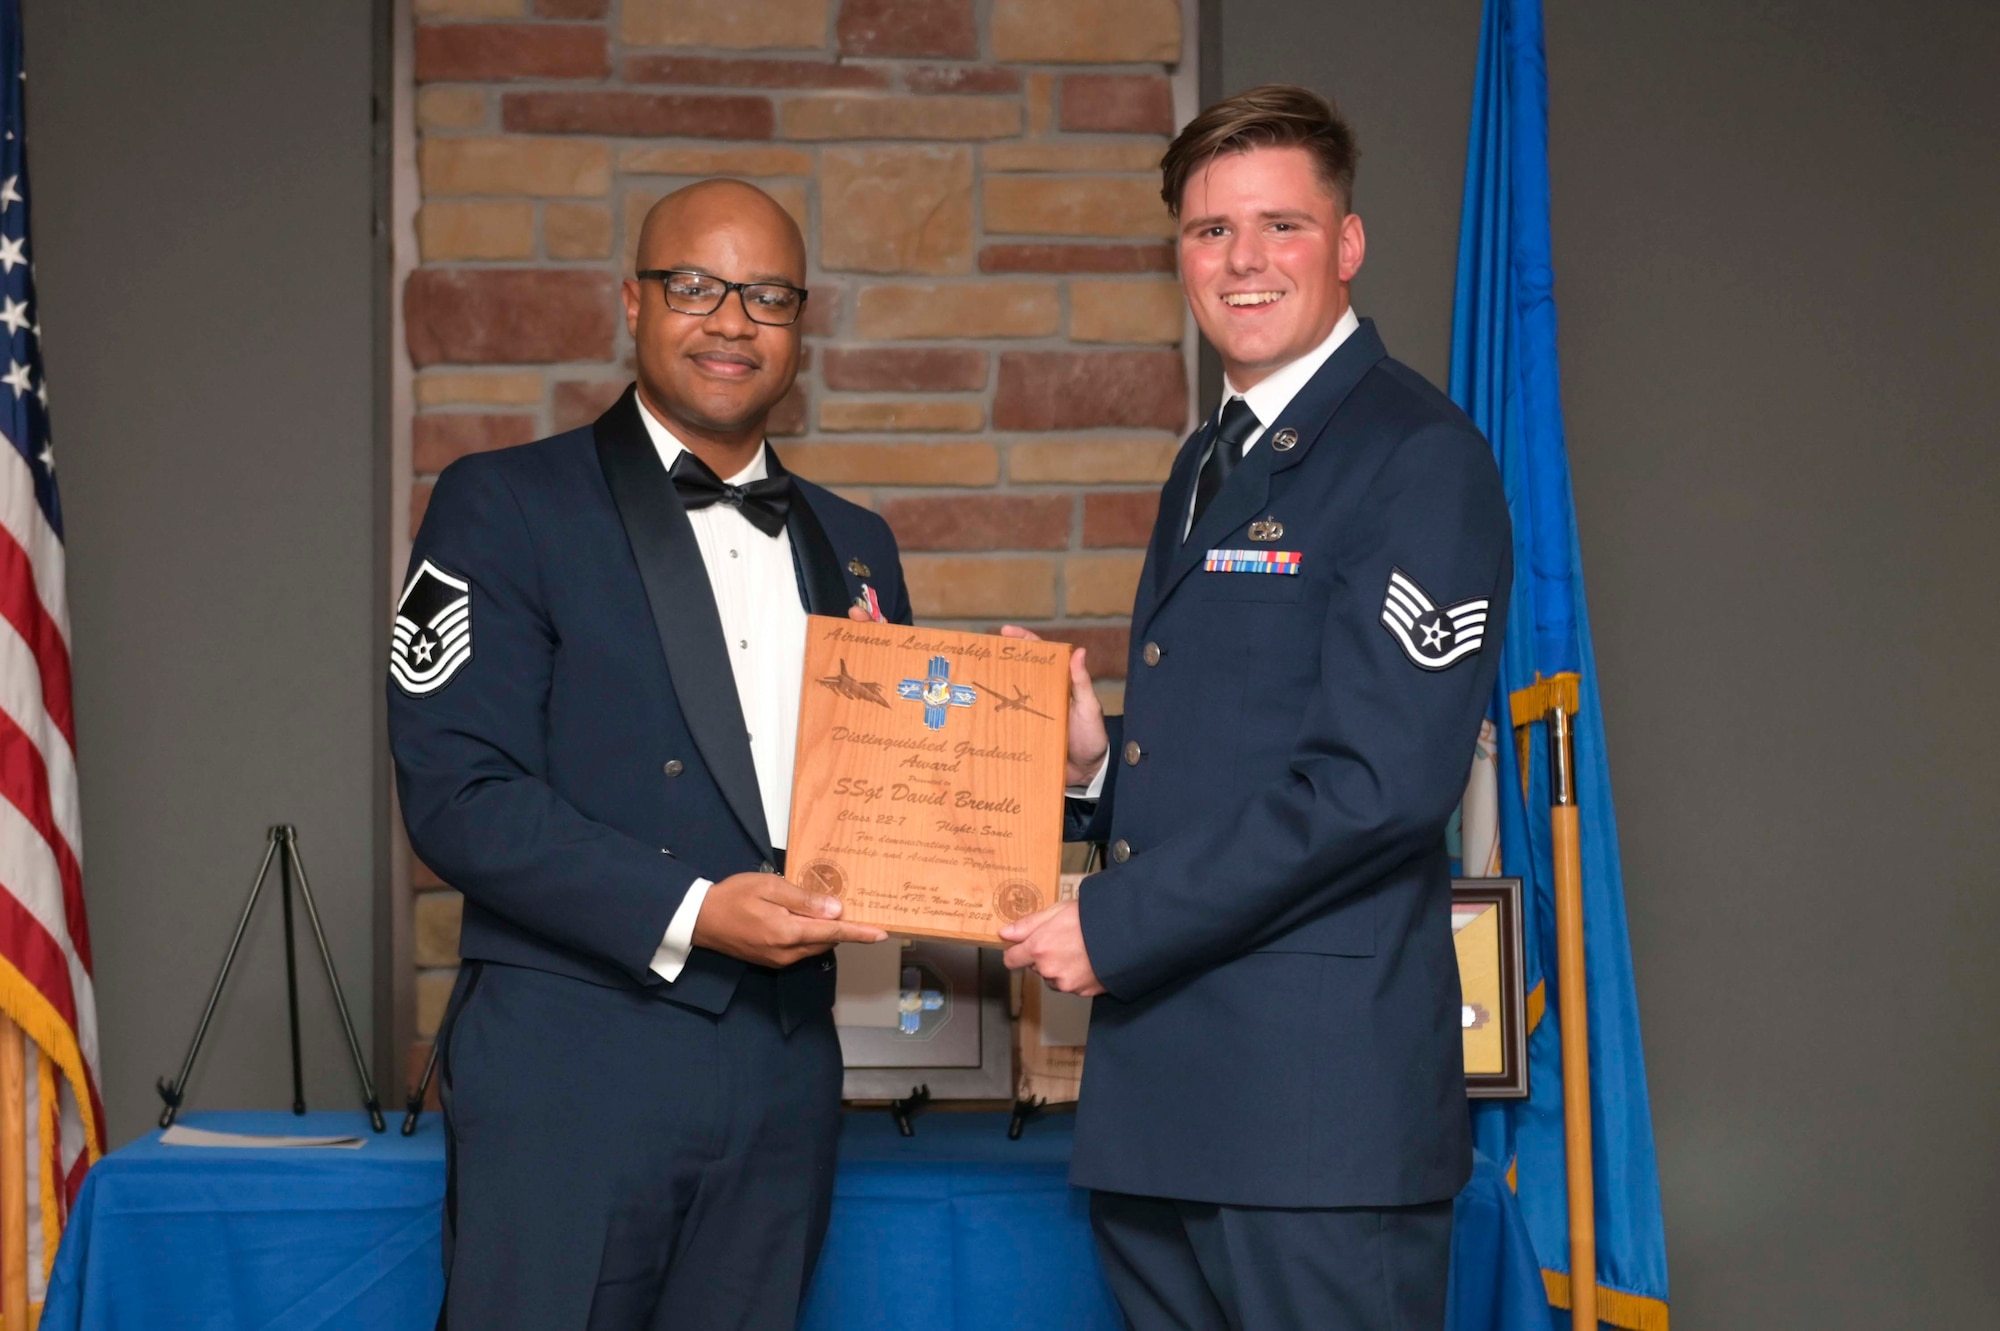 U.S. Air Force Staff Sgt. David Brendle, right, accepts the Distinguished Graduate Award from Holloman Top III representative Master Sgt. Troy Campbell during an Airman Leadership School graduation at Holloman Air Force Base, New Mexico, Sept. 22, 2022. The distinguished graduate award is presented to the top ten-percent of graduates for their performance in academic evaluations and demonstration of leadership. (U.S. Air Force photo by Tech. Sgt. Victor J. Caputo)